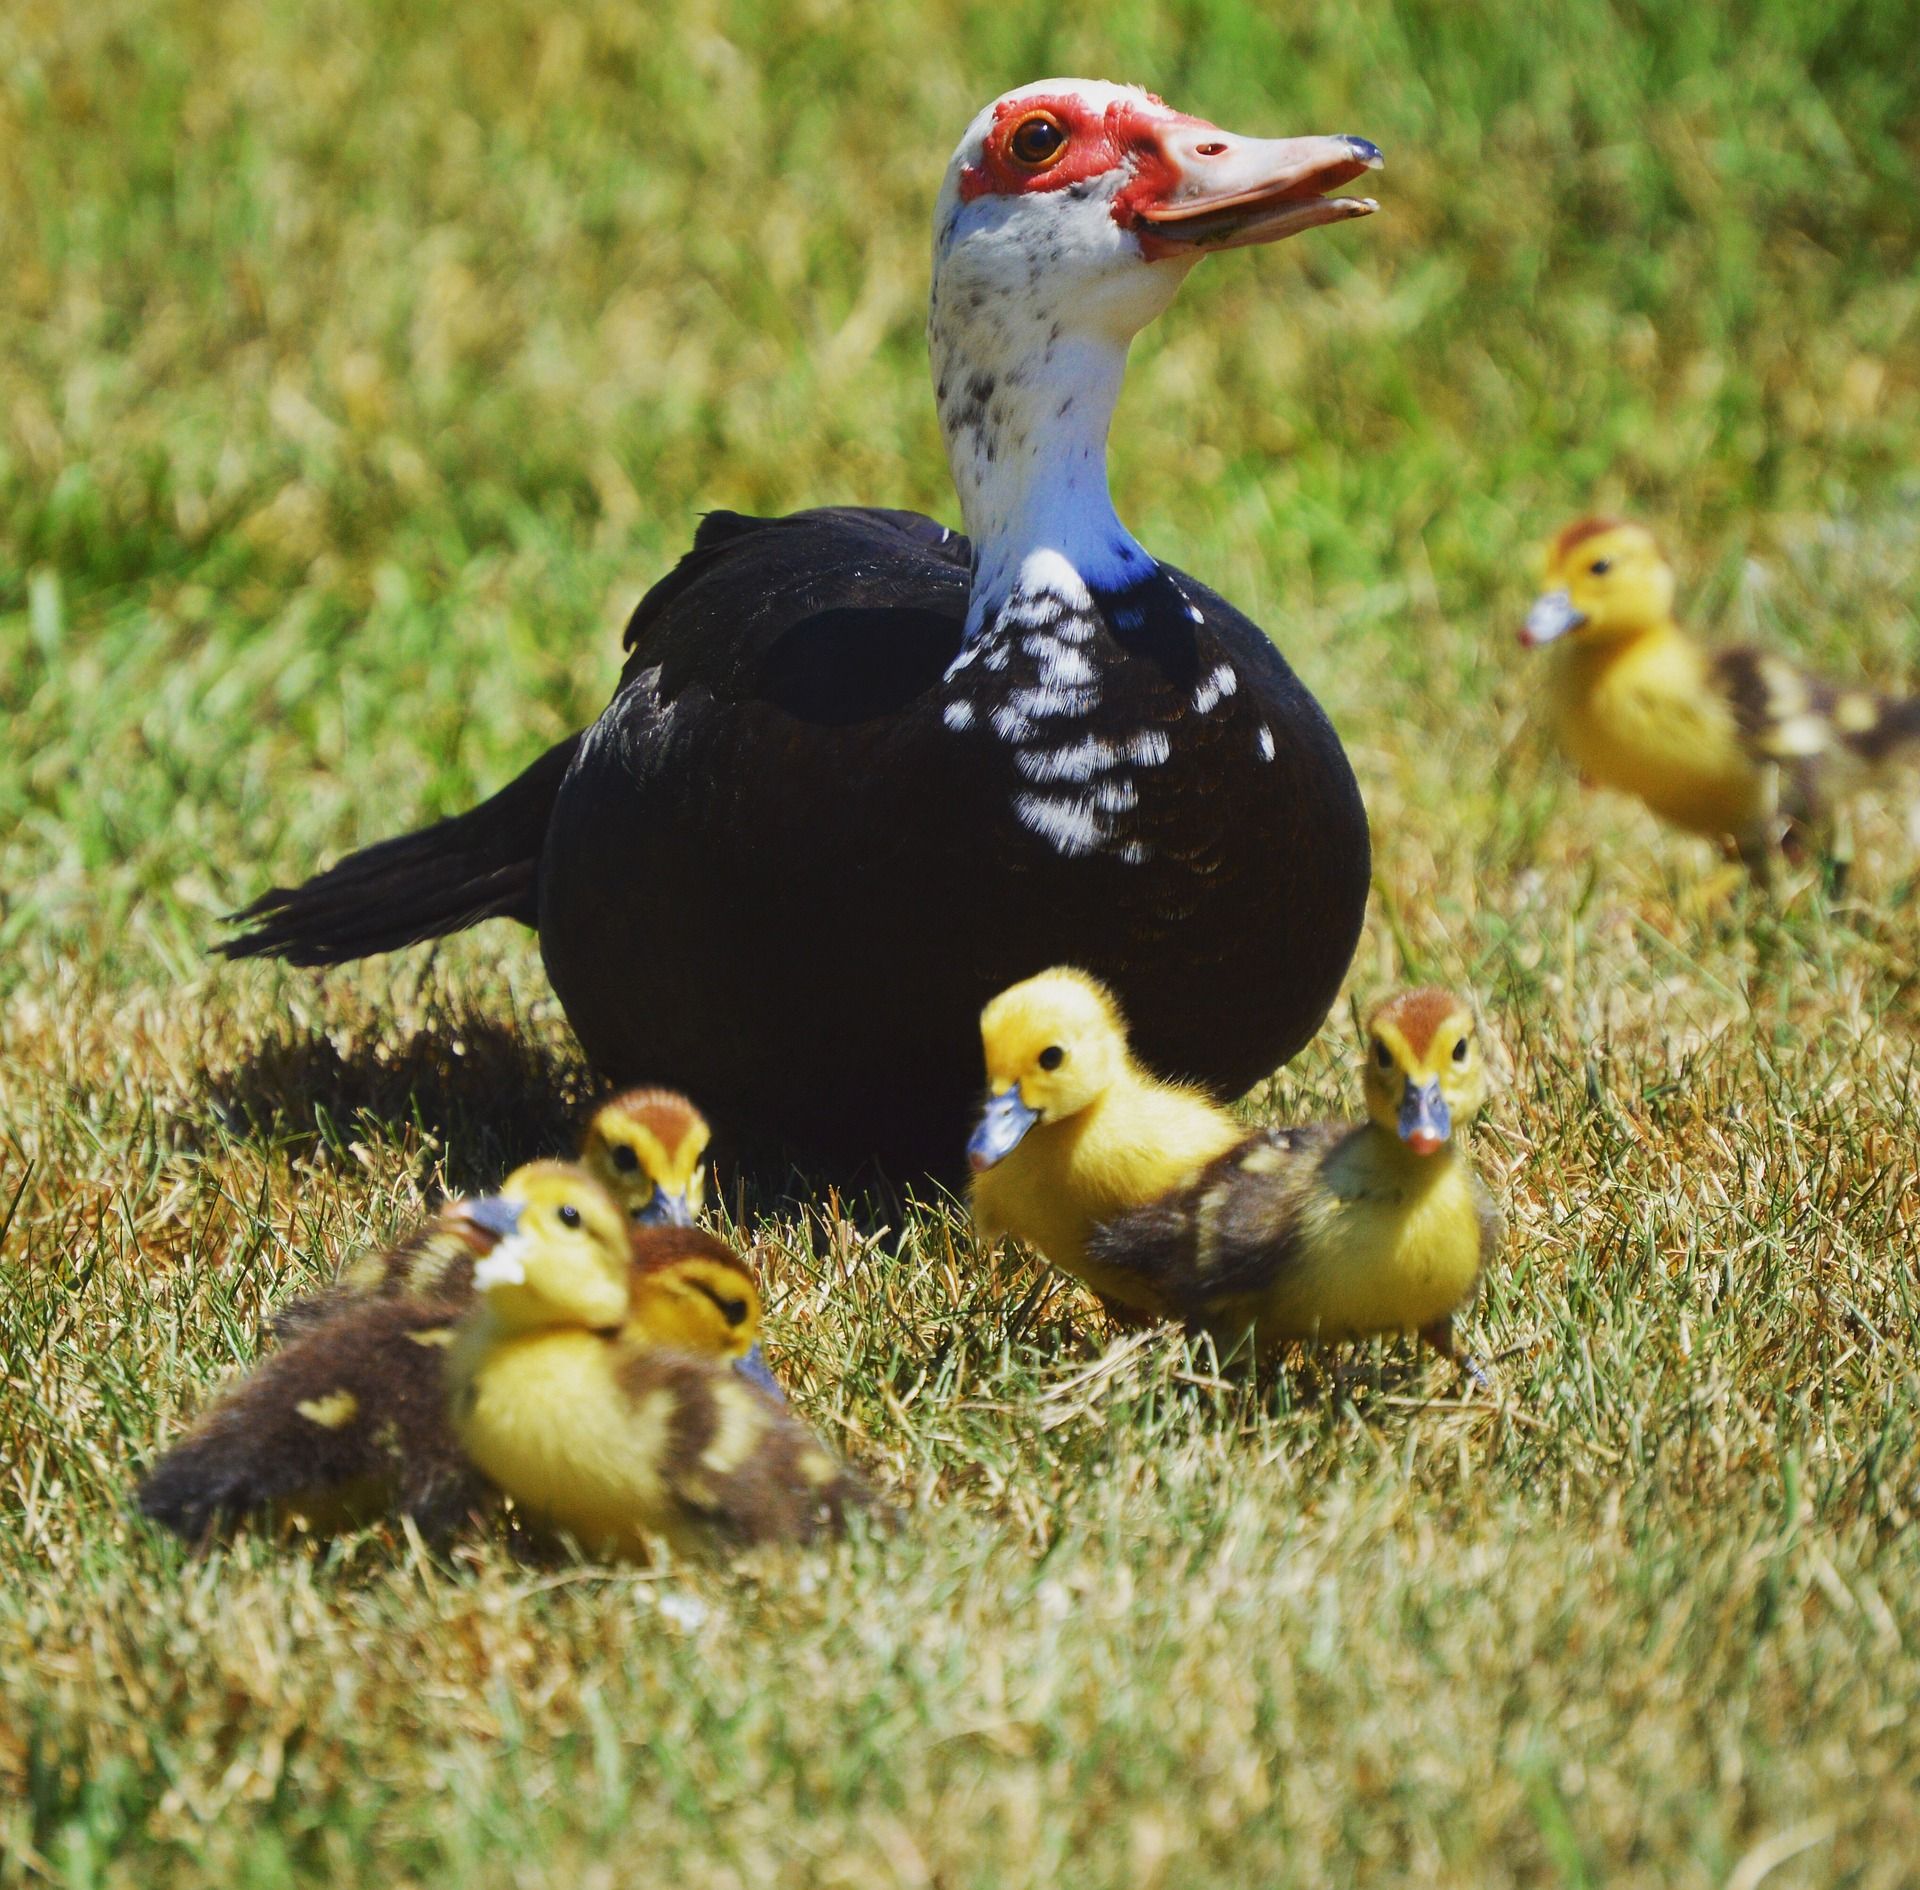 Raising Muscovy Ducks in Your Backyard: Pros and Cons to Consider